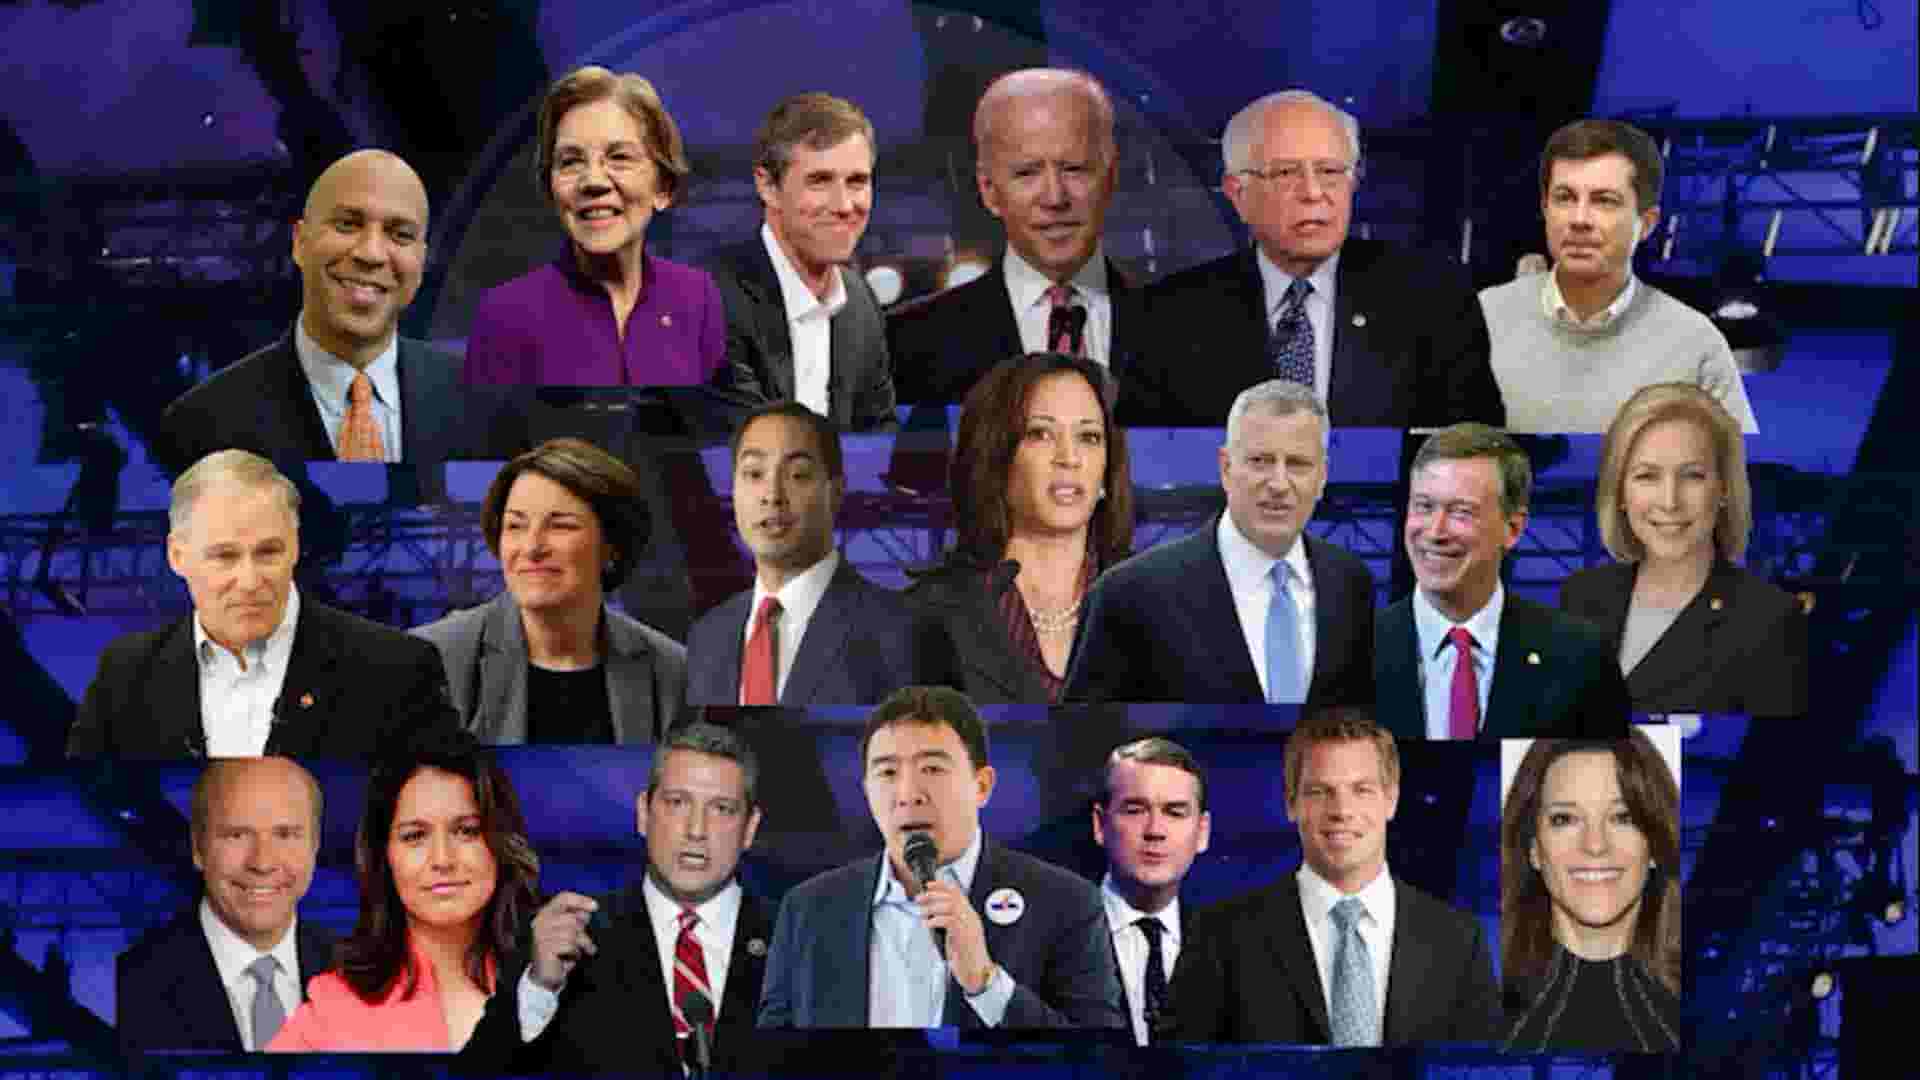 2020 Democrats to face off in first set of debates